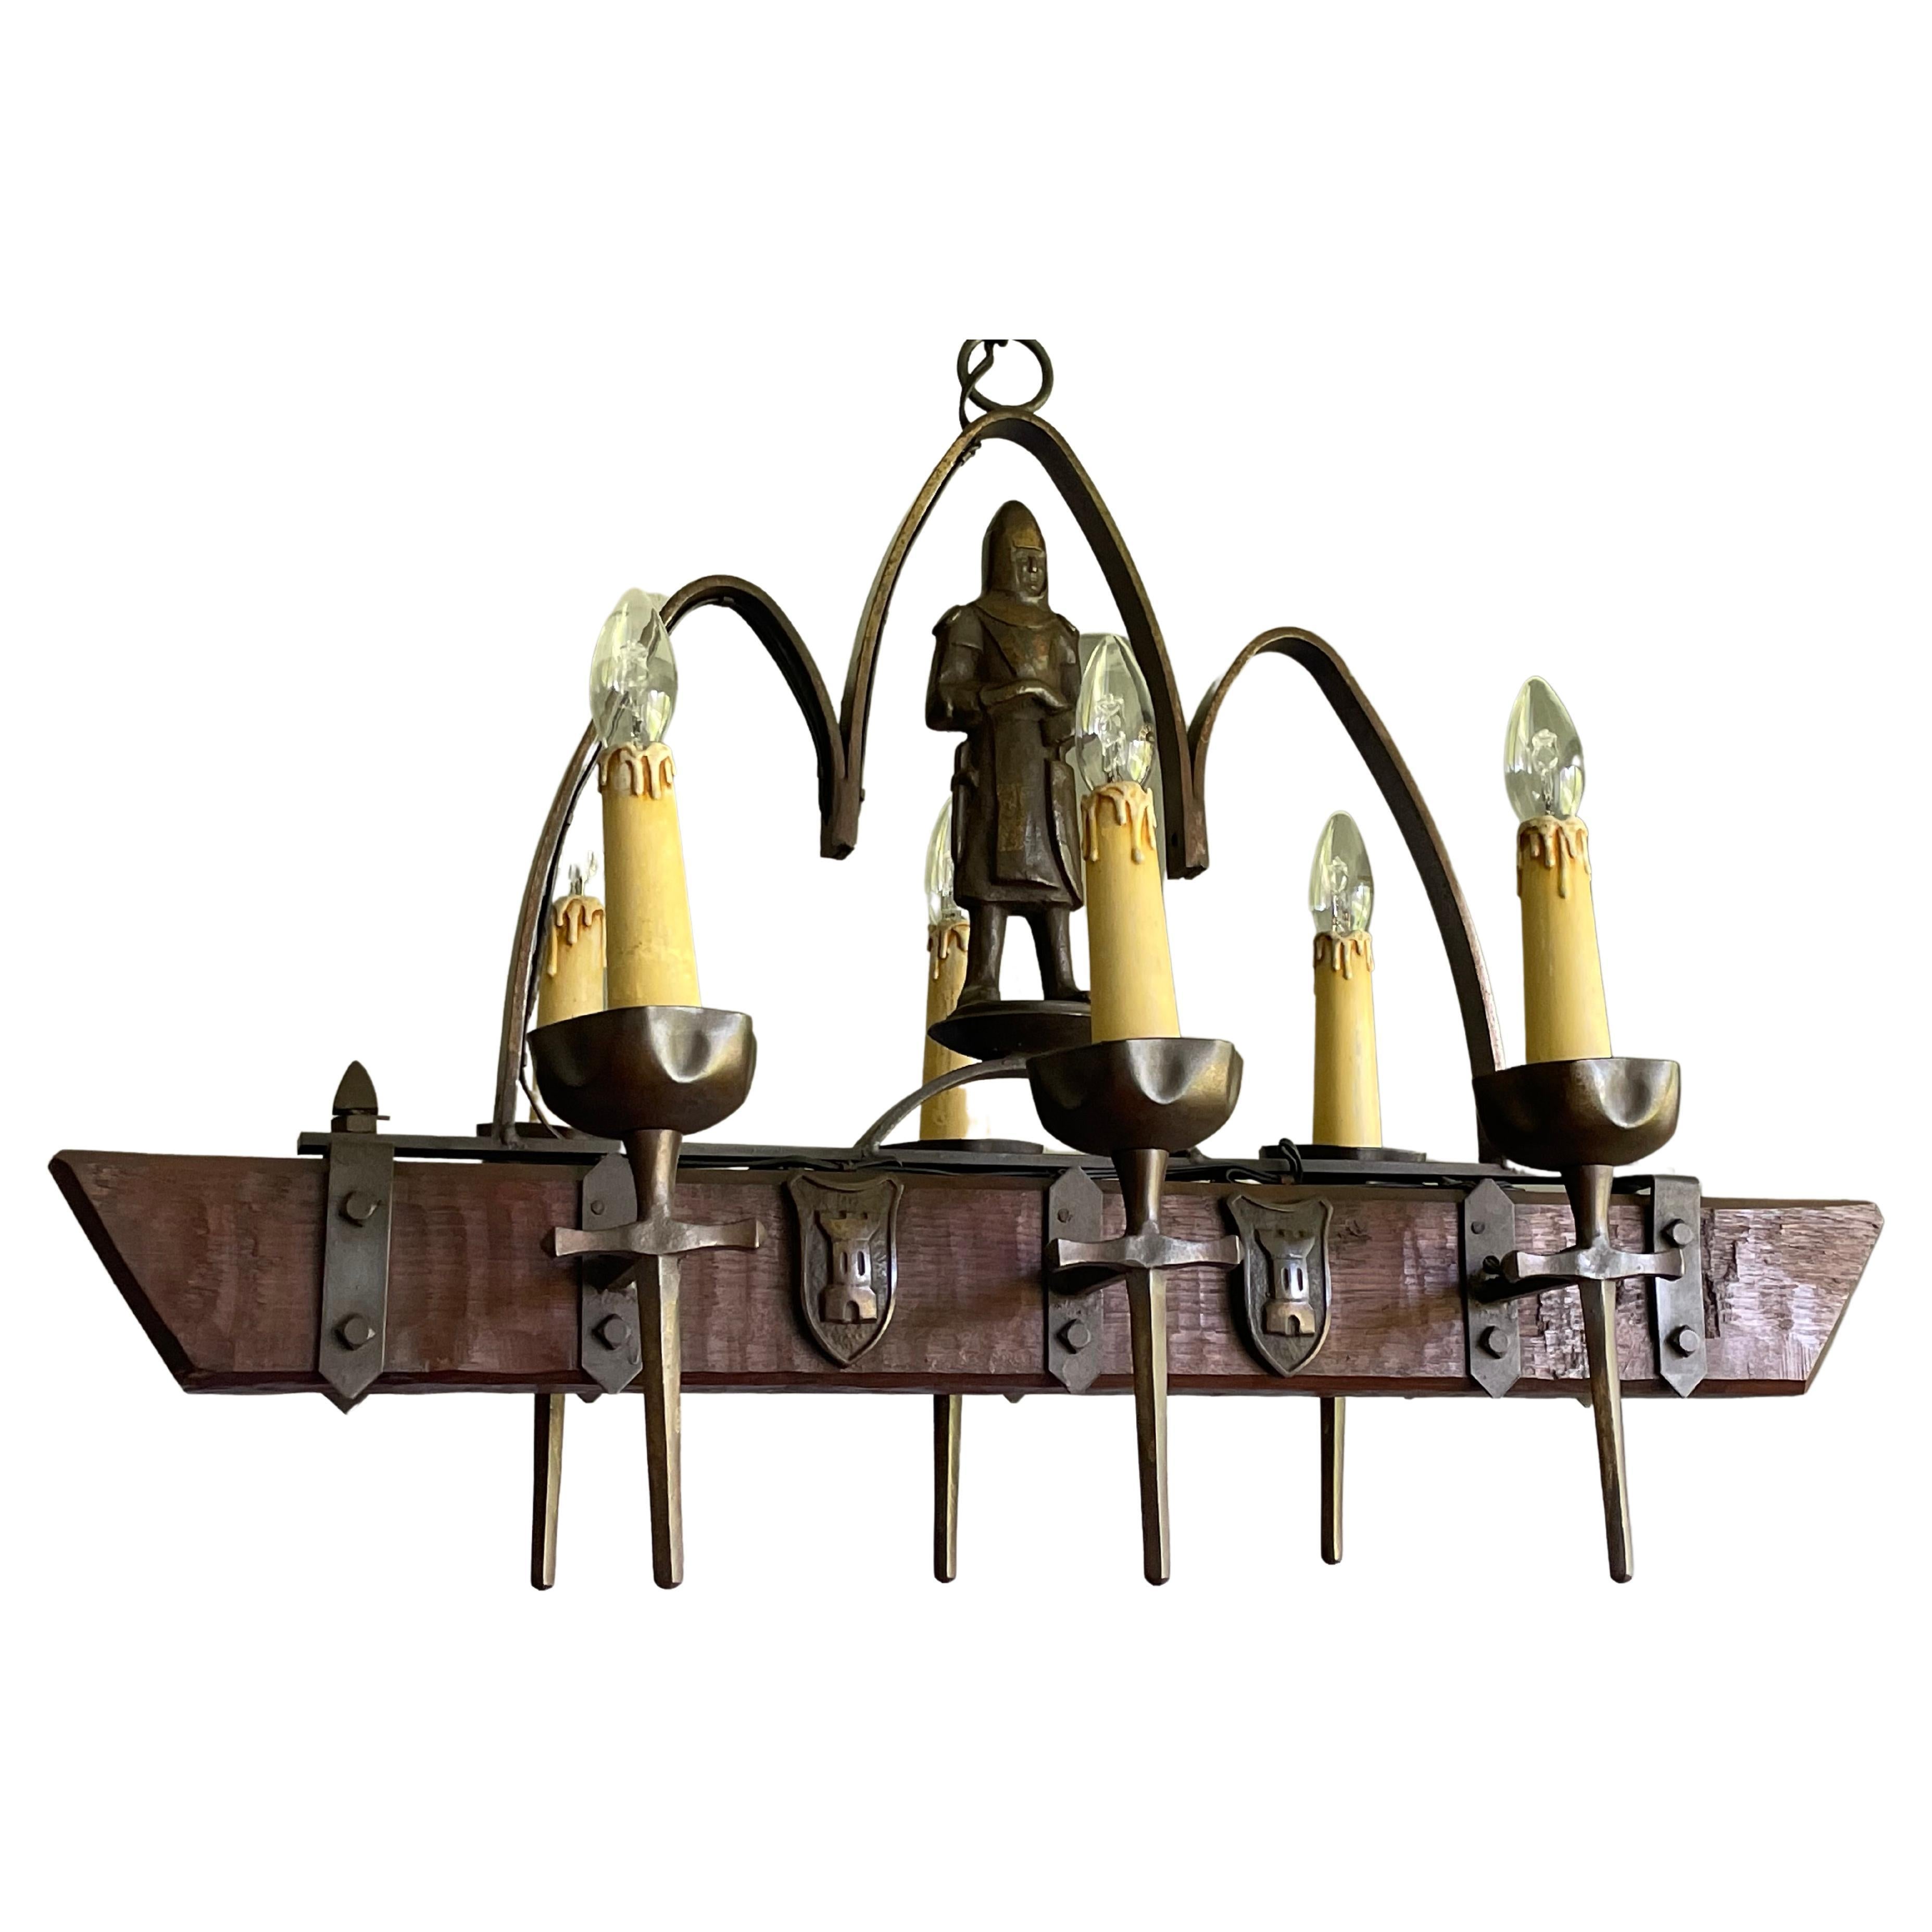 Rare Six-Light Gothic Revival Chandelier with Bronzed Knight & Swords & Crests For Sale